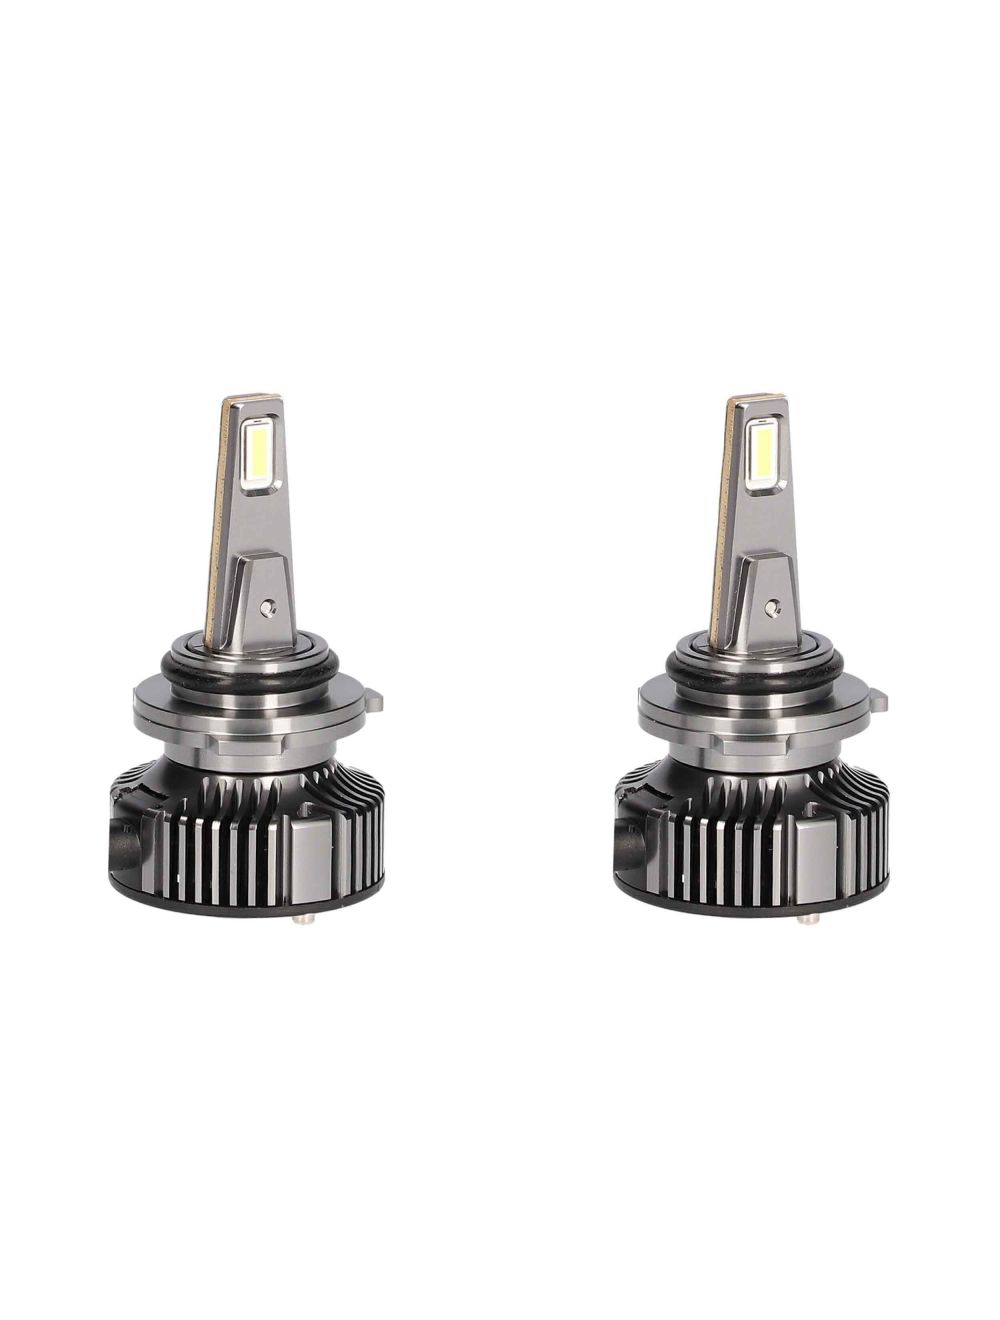 Replacement Low Beam LED Lights for 1990-1993 for Acura Integra